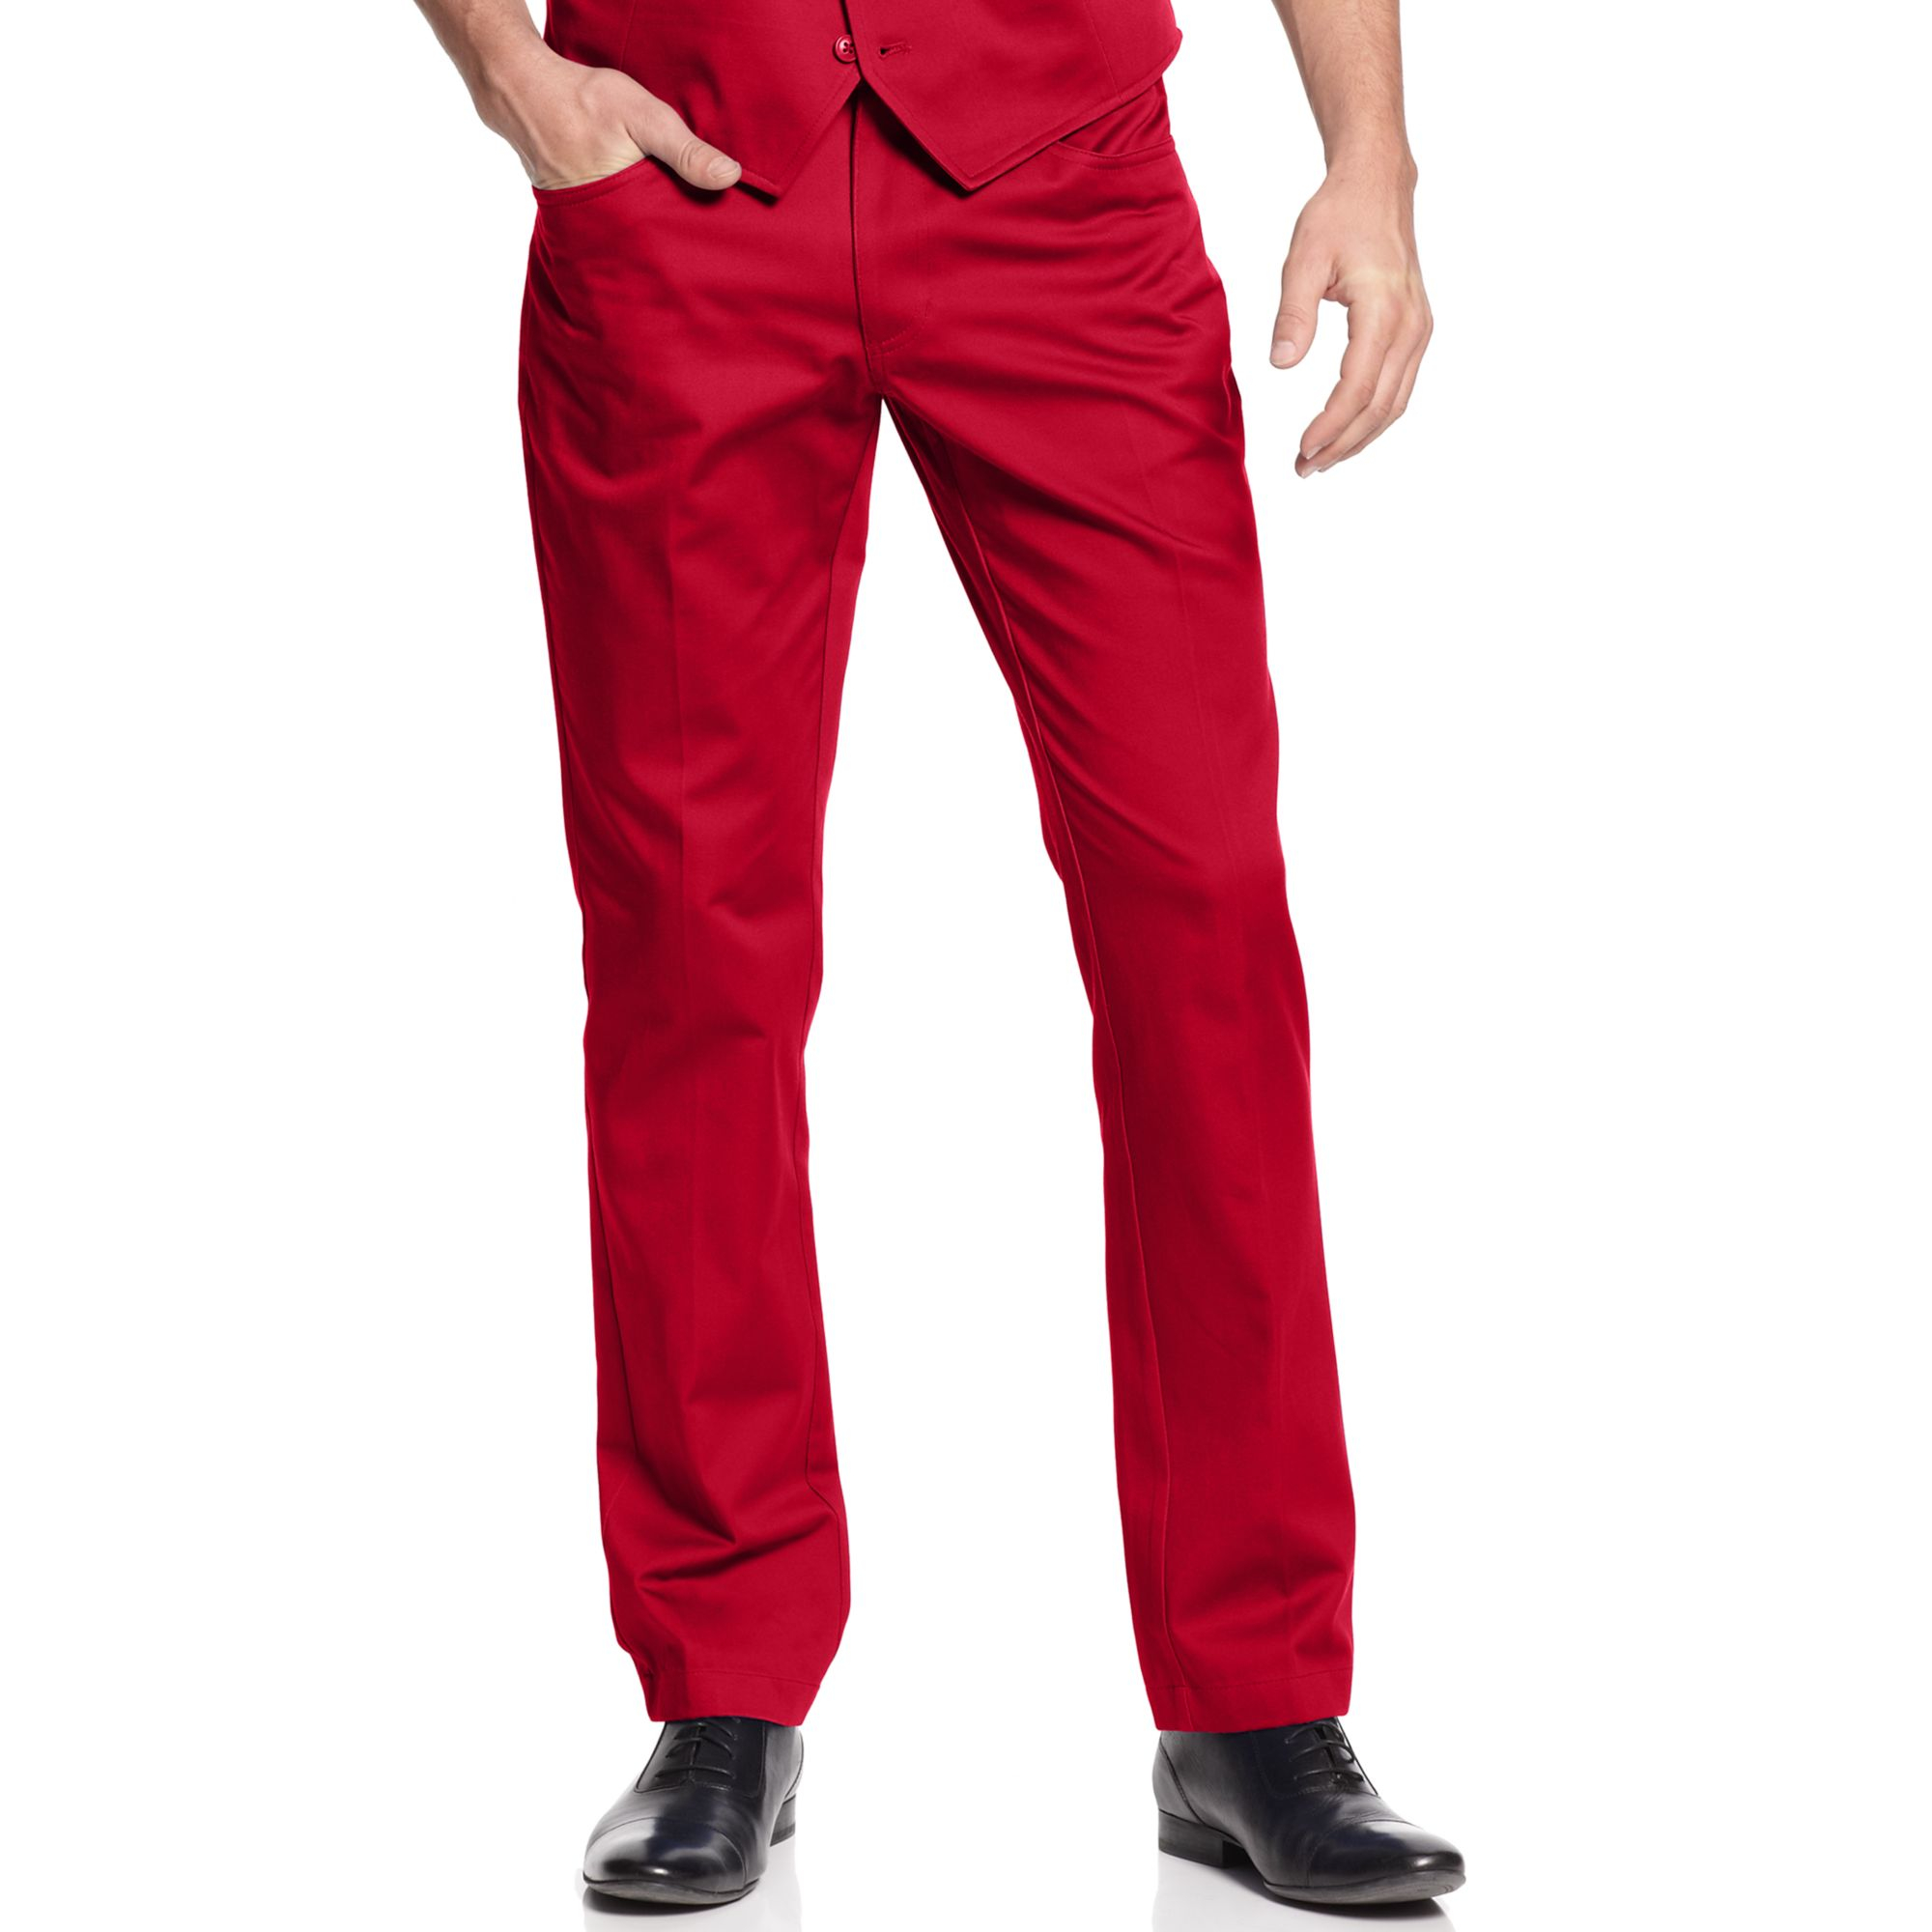 Lyst - Inc International Concepts Slim Fit Truman Pants in Red for Men